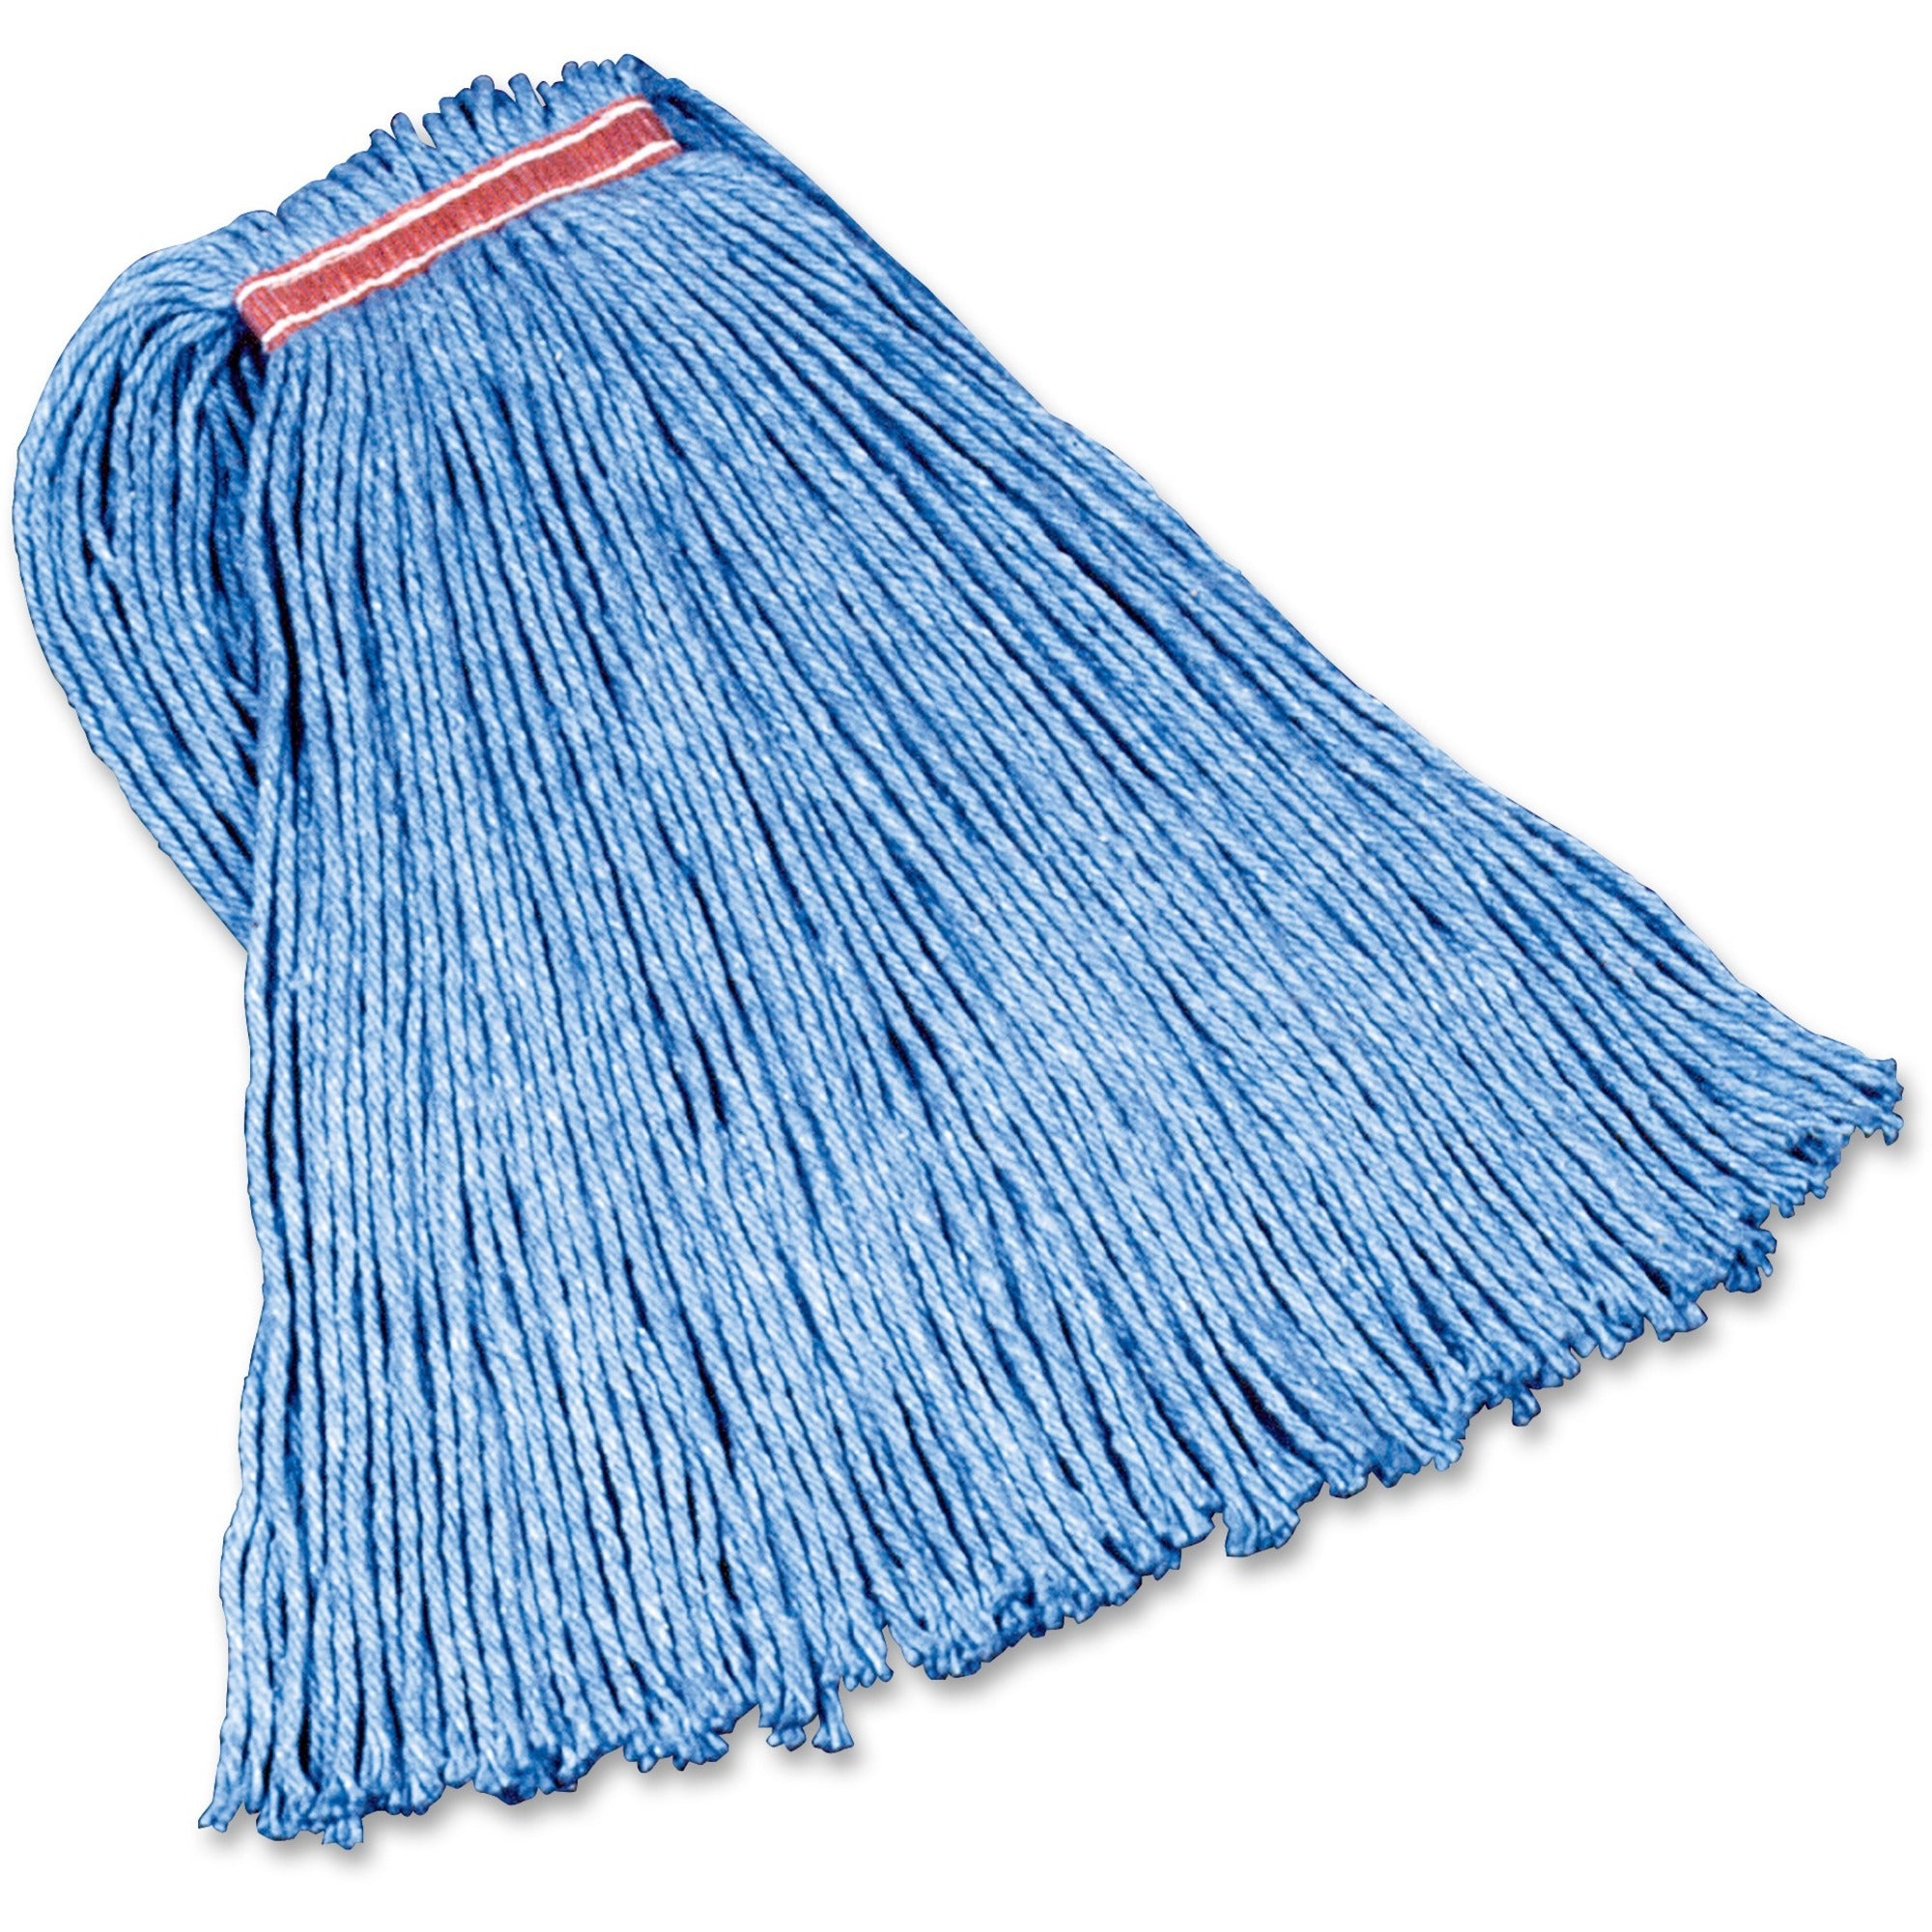 rubbermaid-commercial-1-headband-dura-pro-wet-mop-cotton-head-4-ply-cut-ends-absorbent-durable-12-carton-blue_rcpf51800be - 1